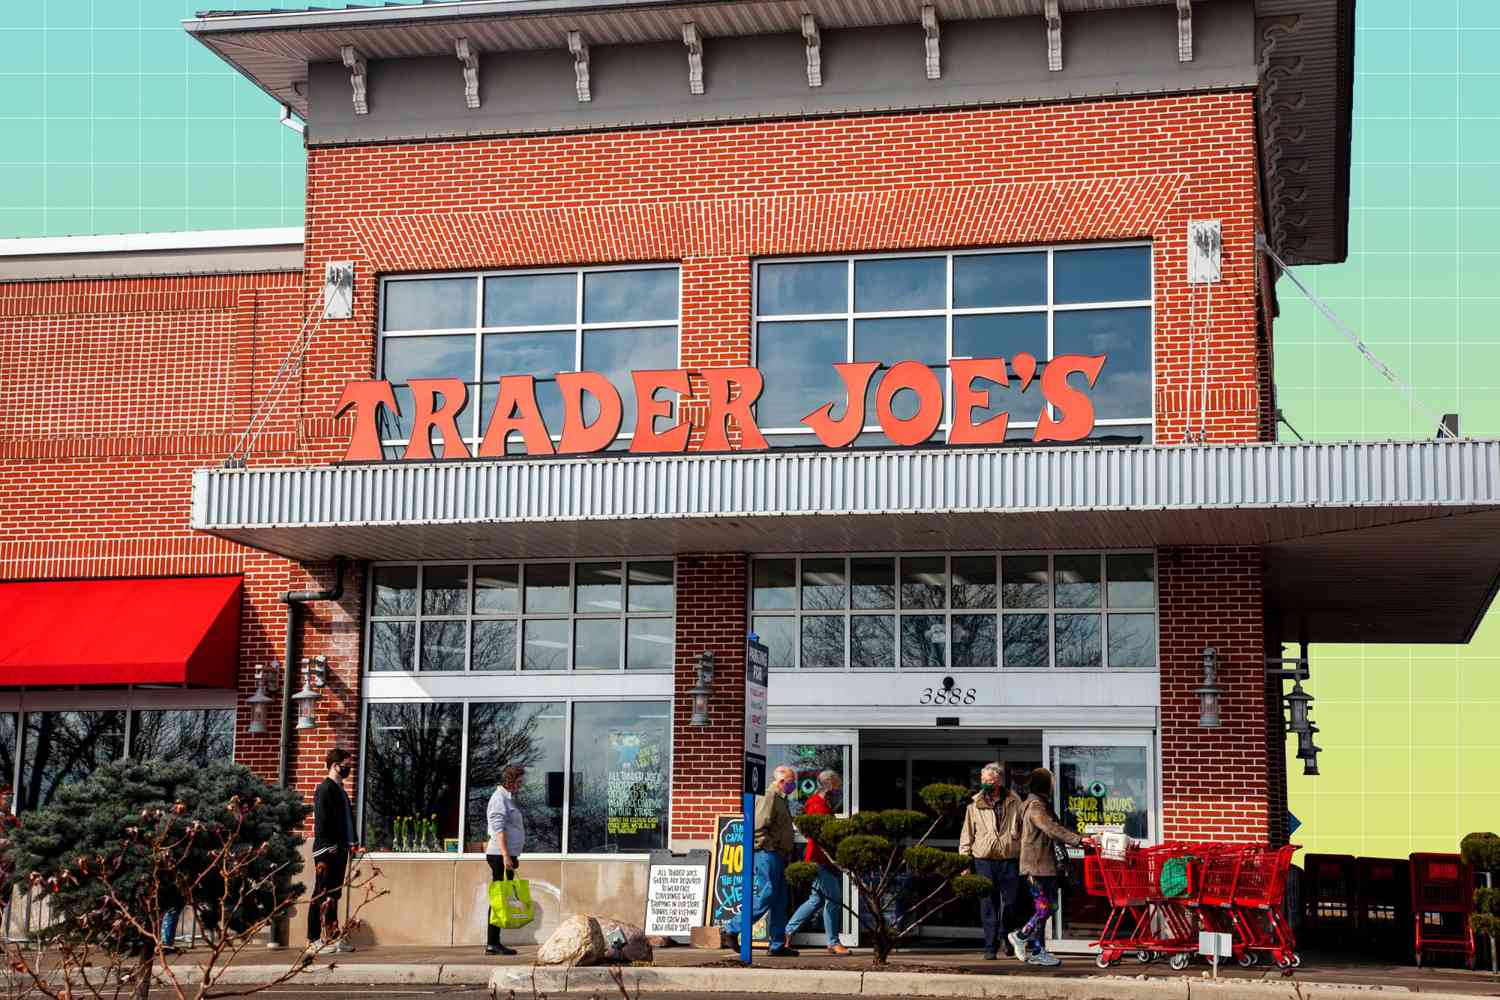 Trader Joe's storefront with a designed treatment